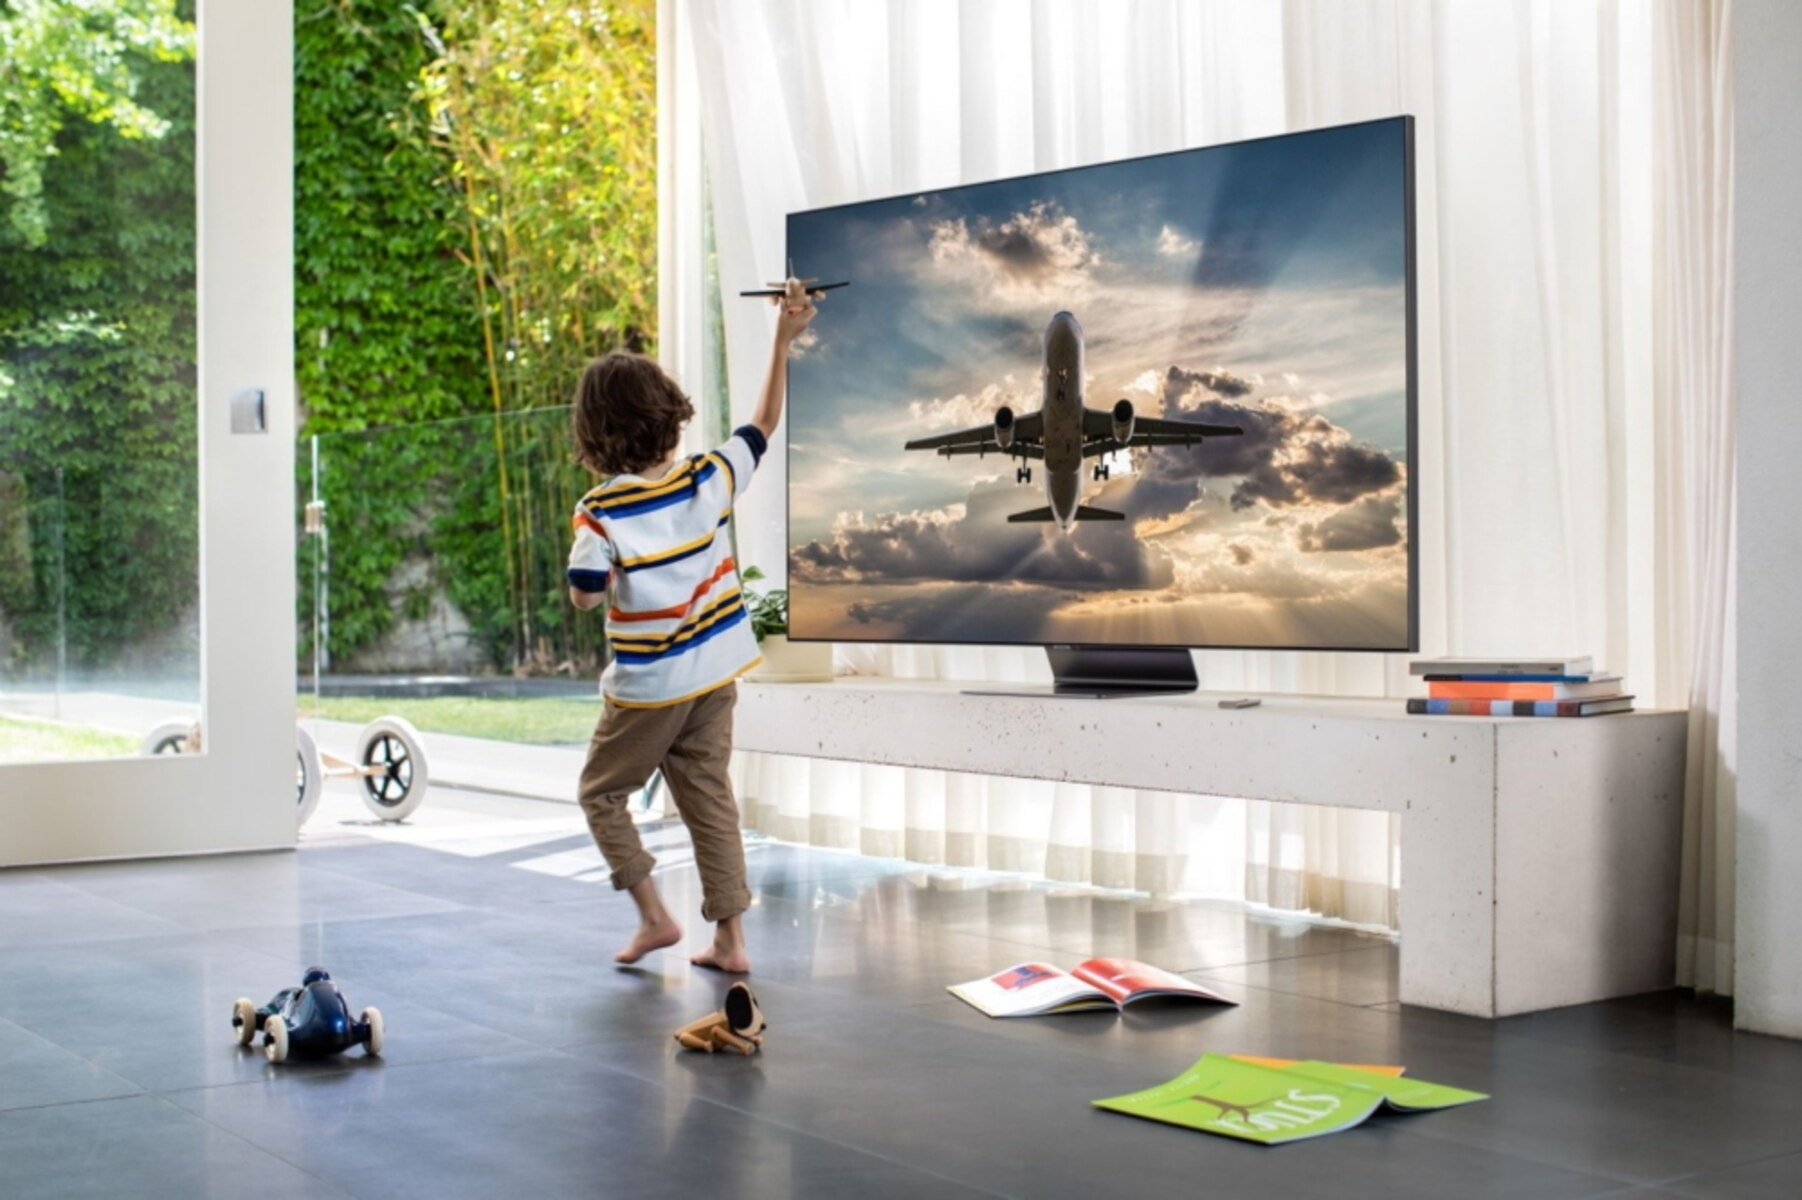 How To Enable TV Sound And Stereo Sound Simultaneously On A Samsung QLED TV